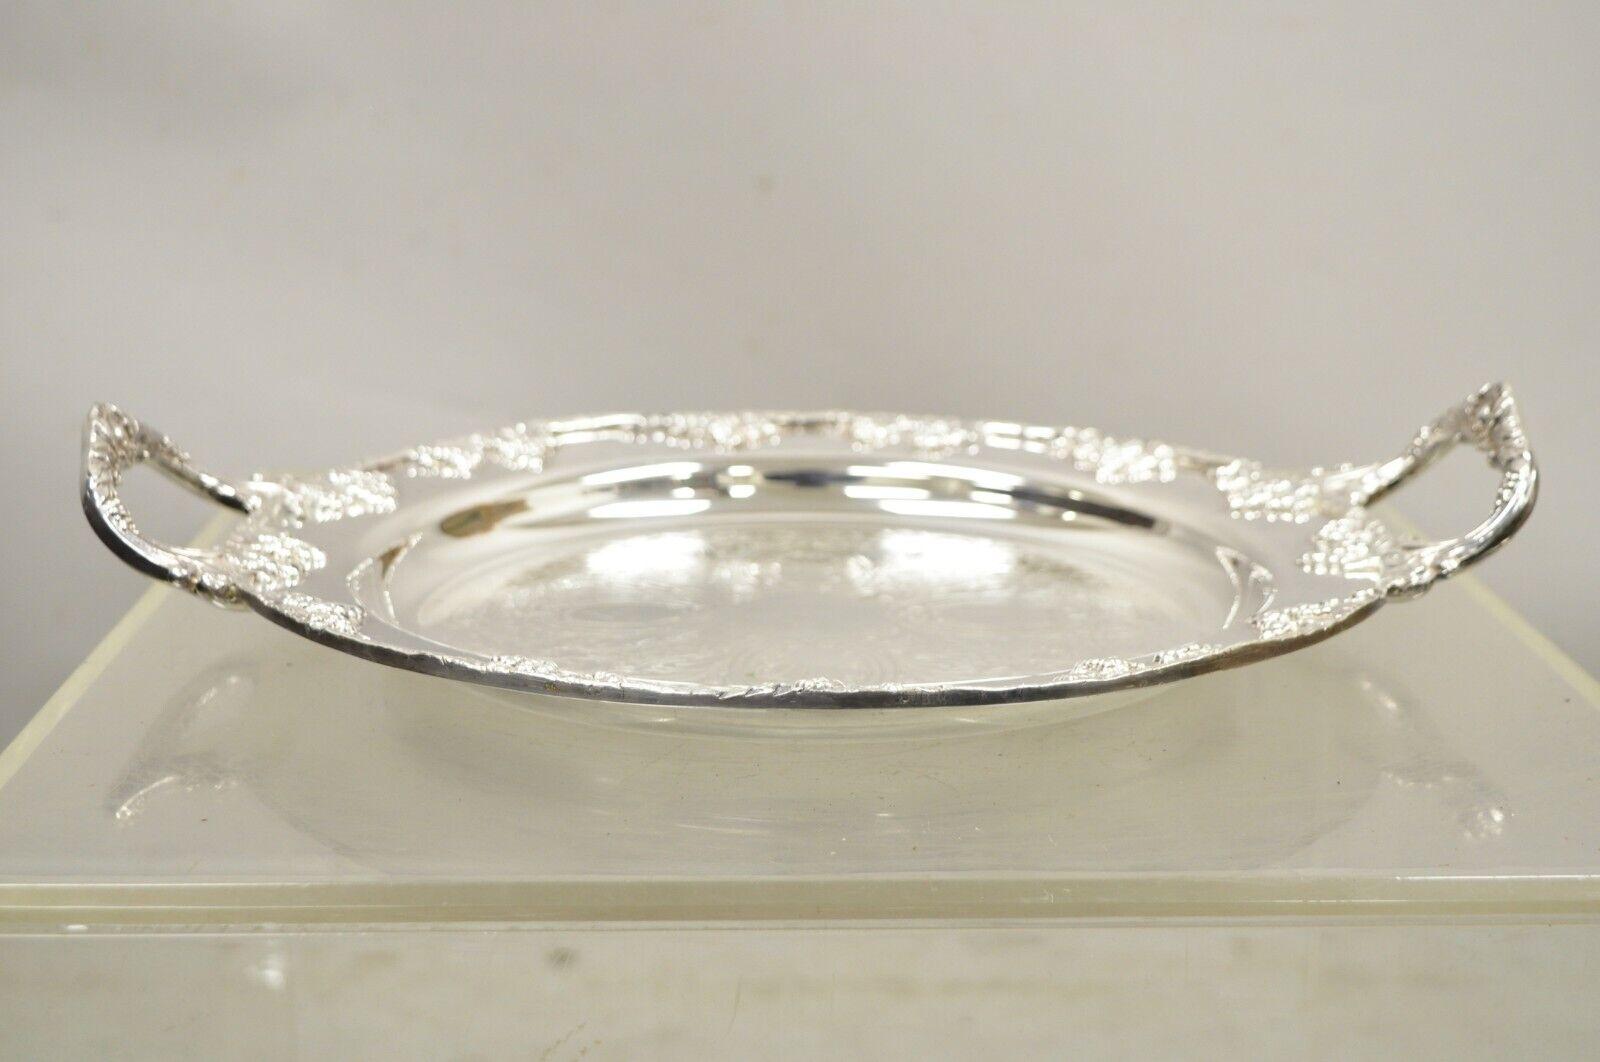 Lifetime Brand English Silver Plate Twin Handle Grapevine Round Serving Tray. Circa Mid 20th Century. Measurements: 2.5